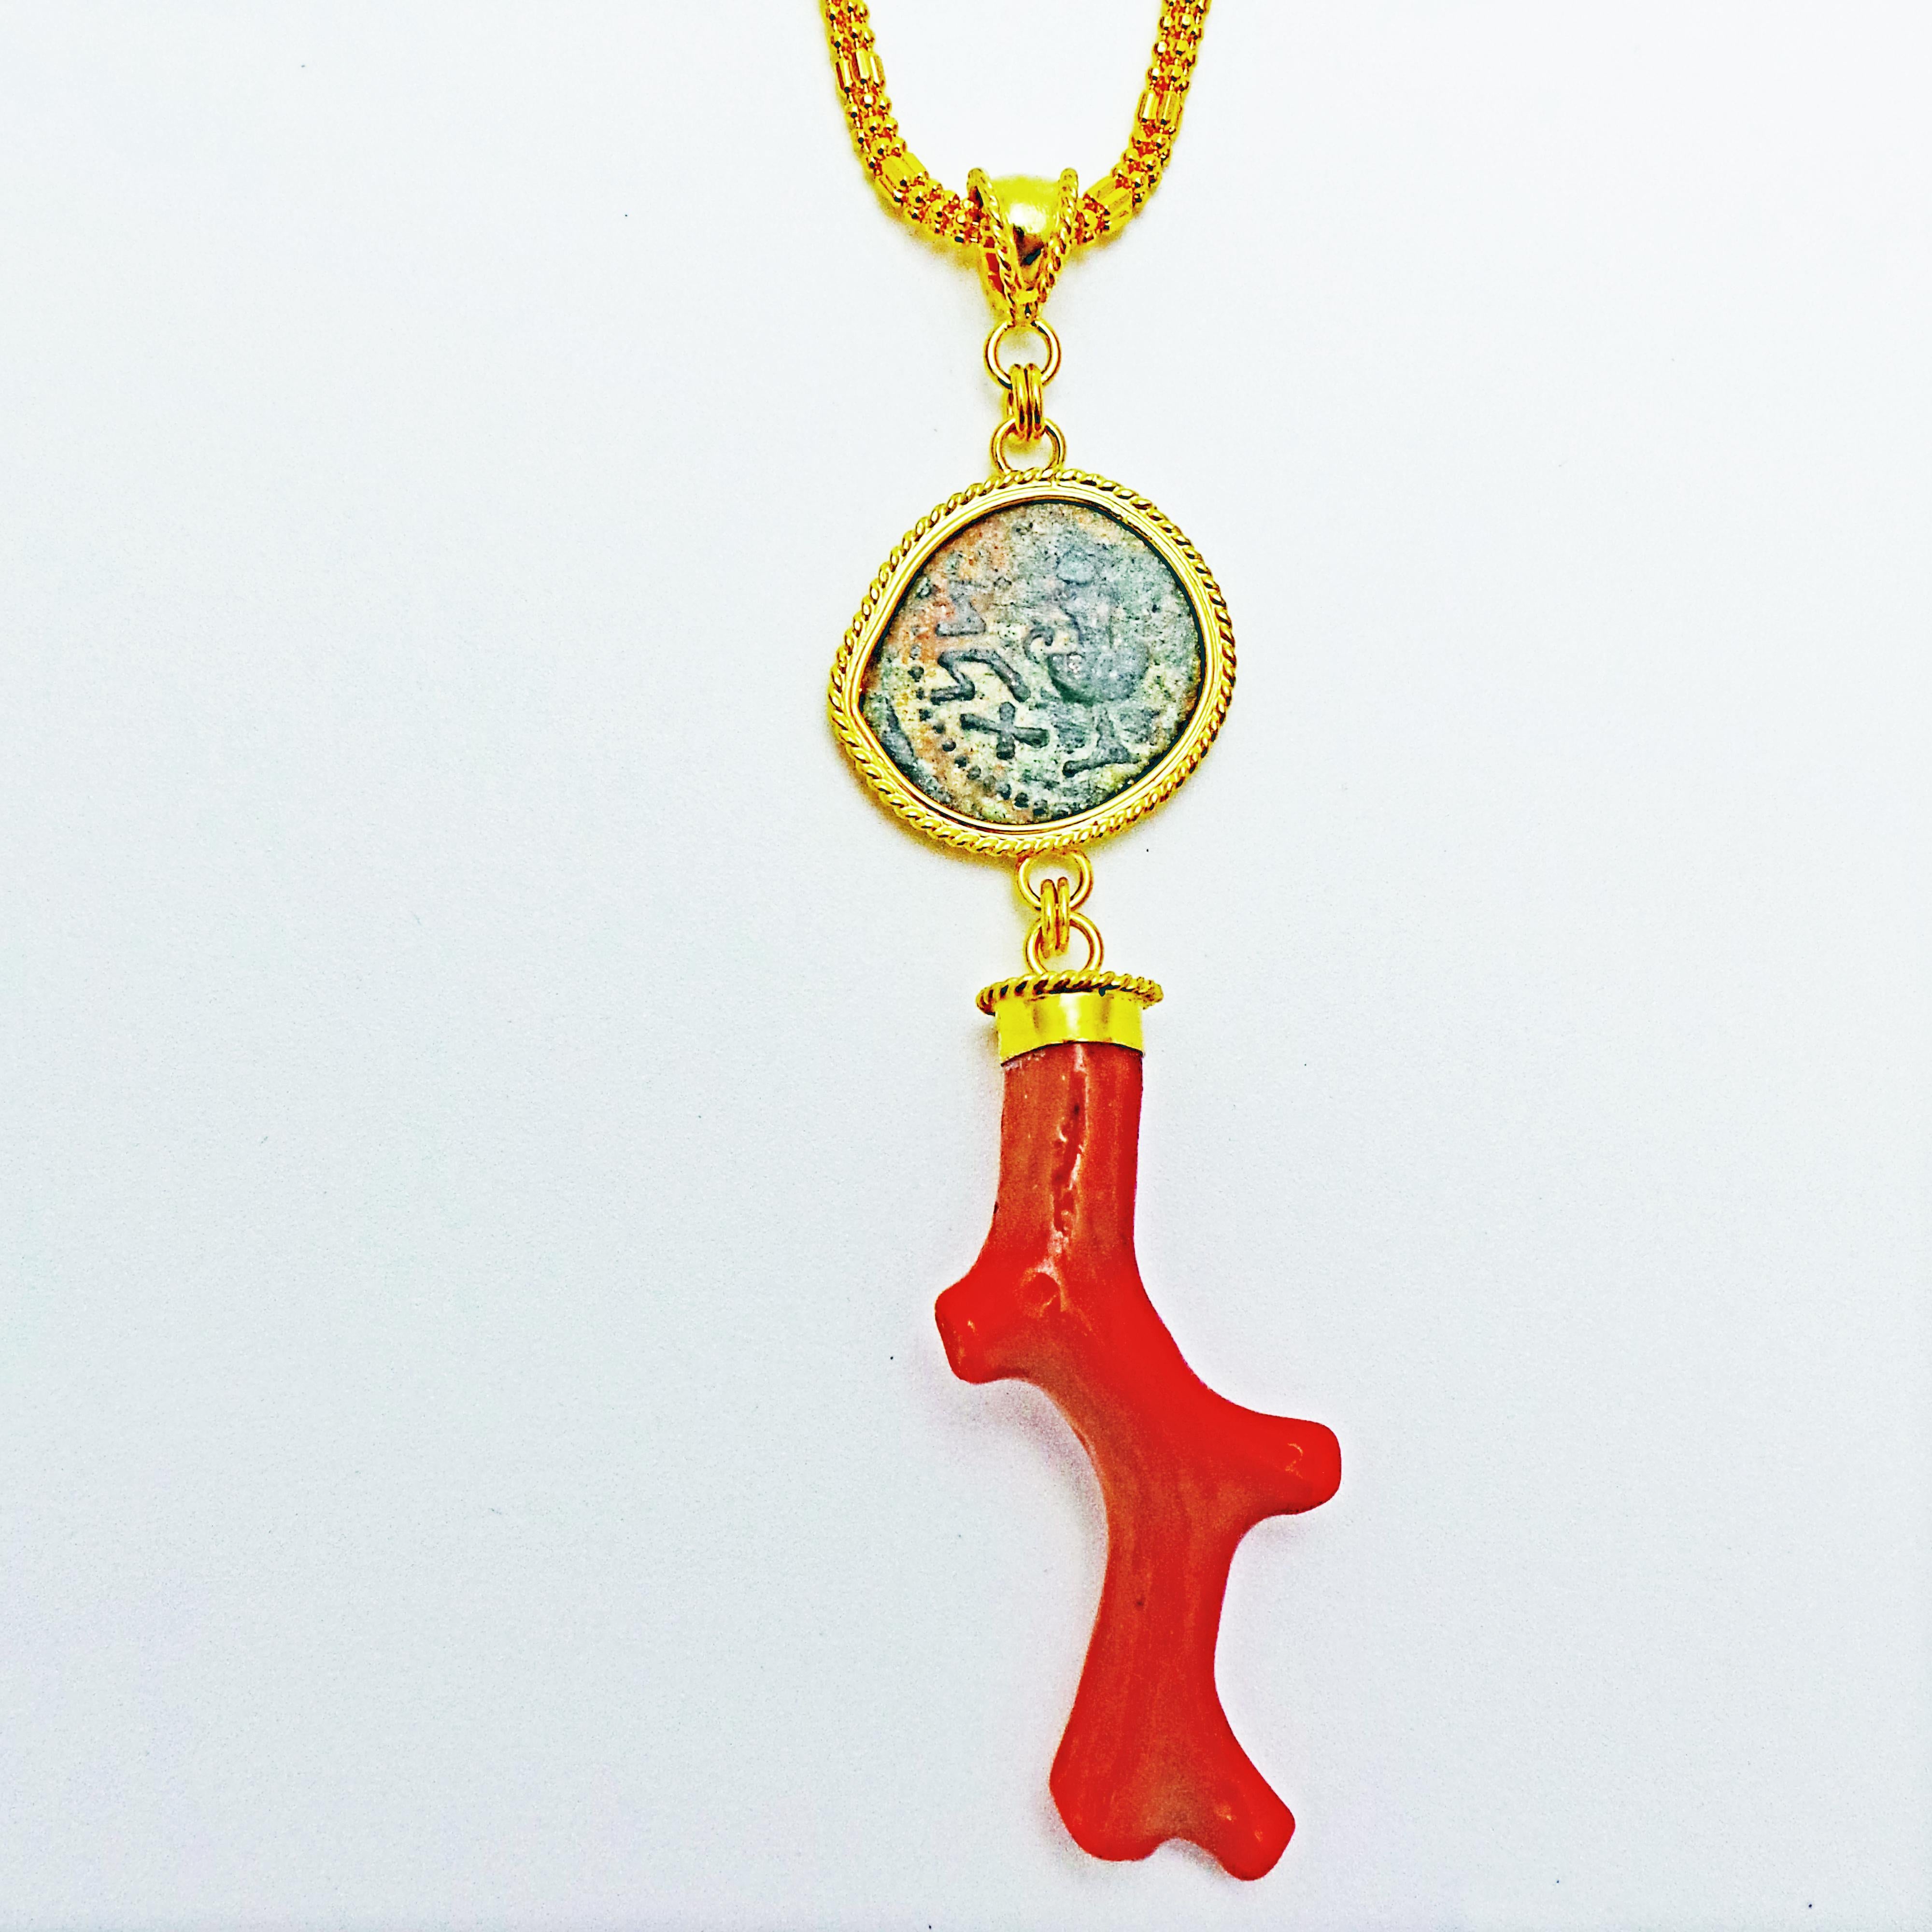 Authentic ancient Jewish bronze coin (Widow's mite ), 1st century BC - 1st century AD) and organic branch coral set in 22k yellow gold pendant on a 22k yellow gold chain. Coral is the color of 2019. 